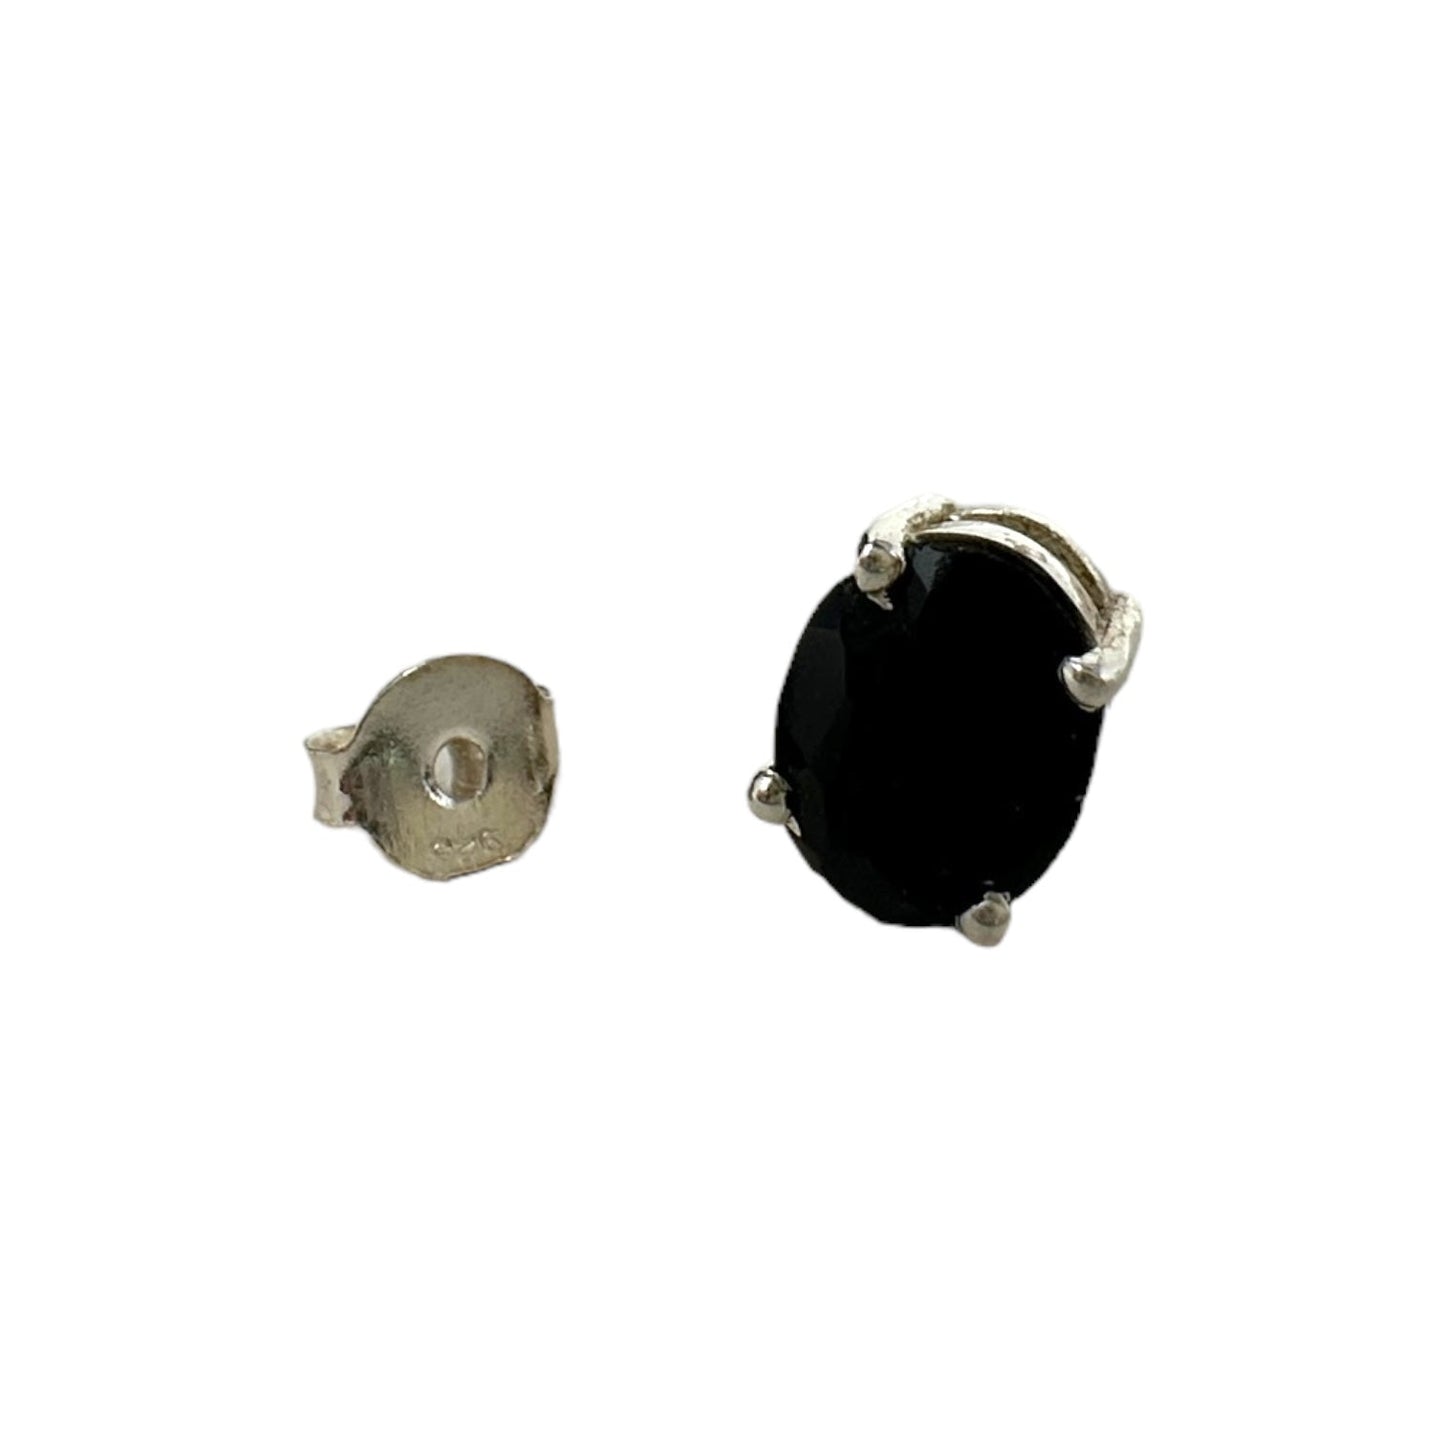 Faceted Onyx & Sterling Silver Stud Earrings Unknown Brand